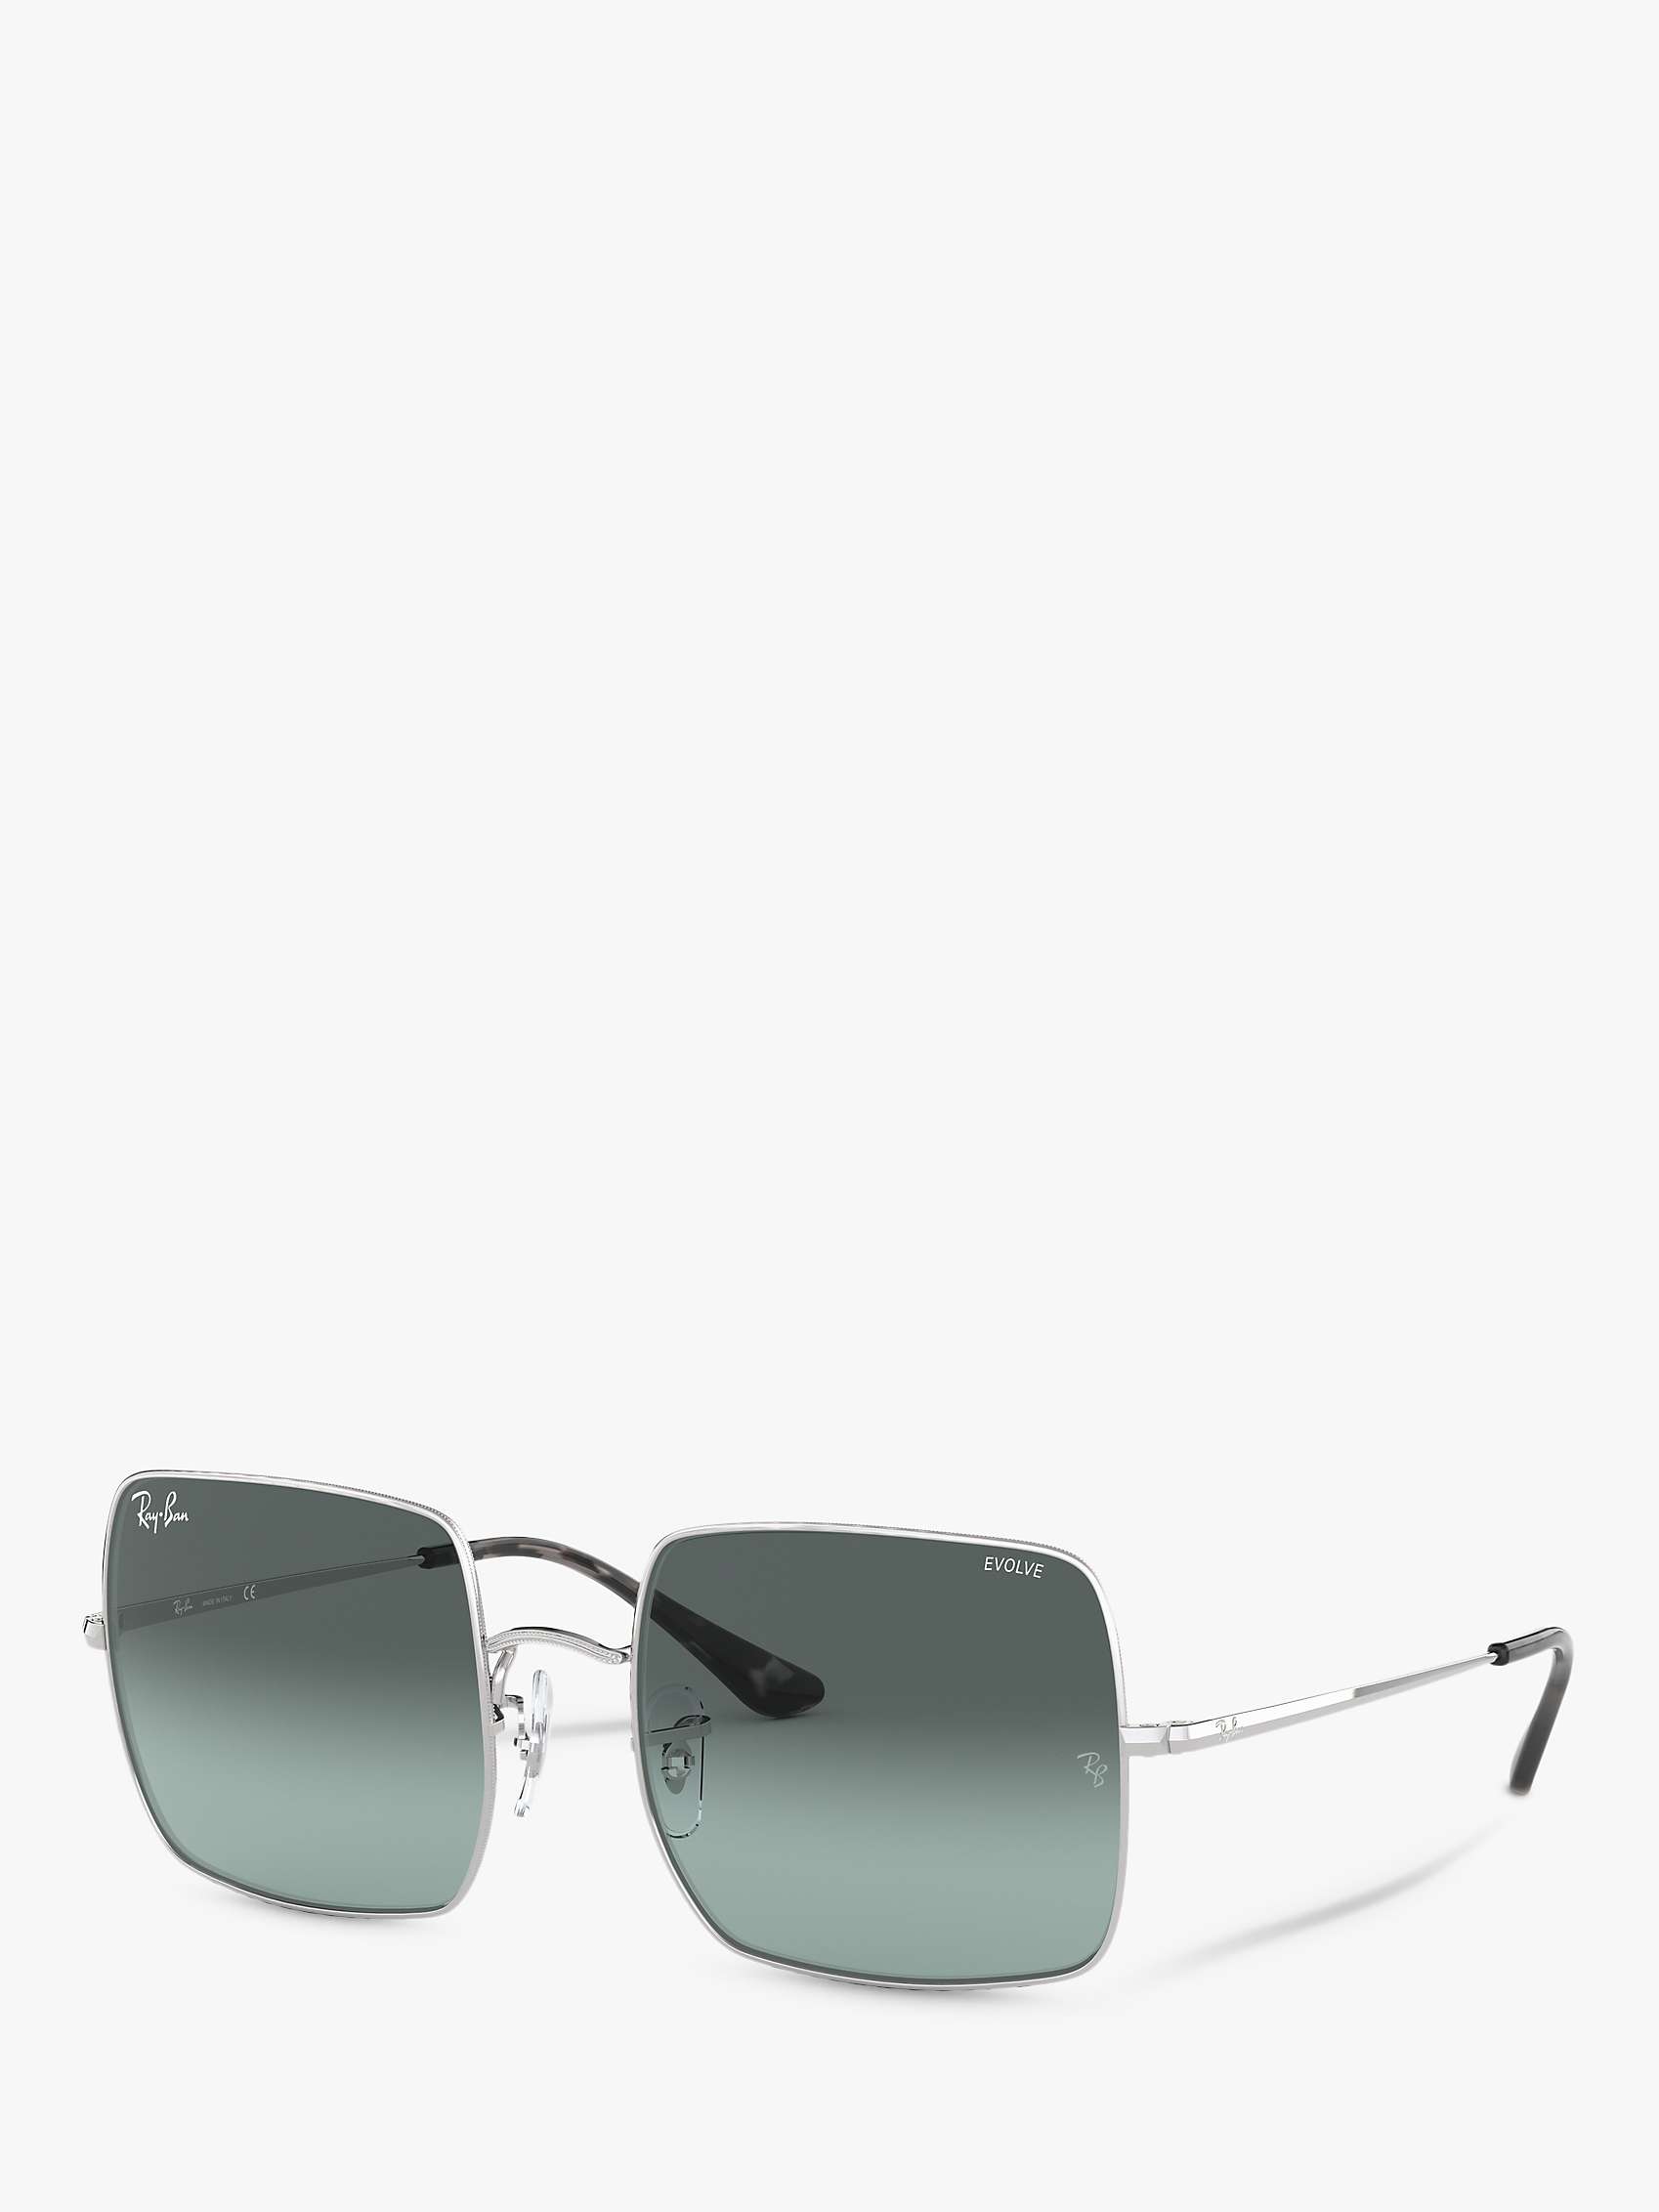 Buy Ray-Ban RB1971 Unisex Square Sunglasses Online at johnlewis.com